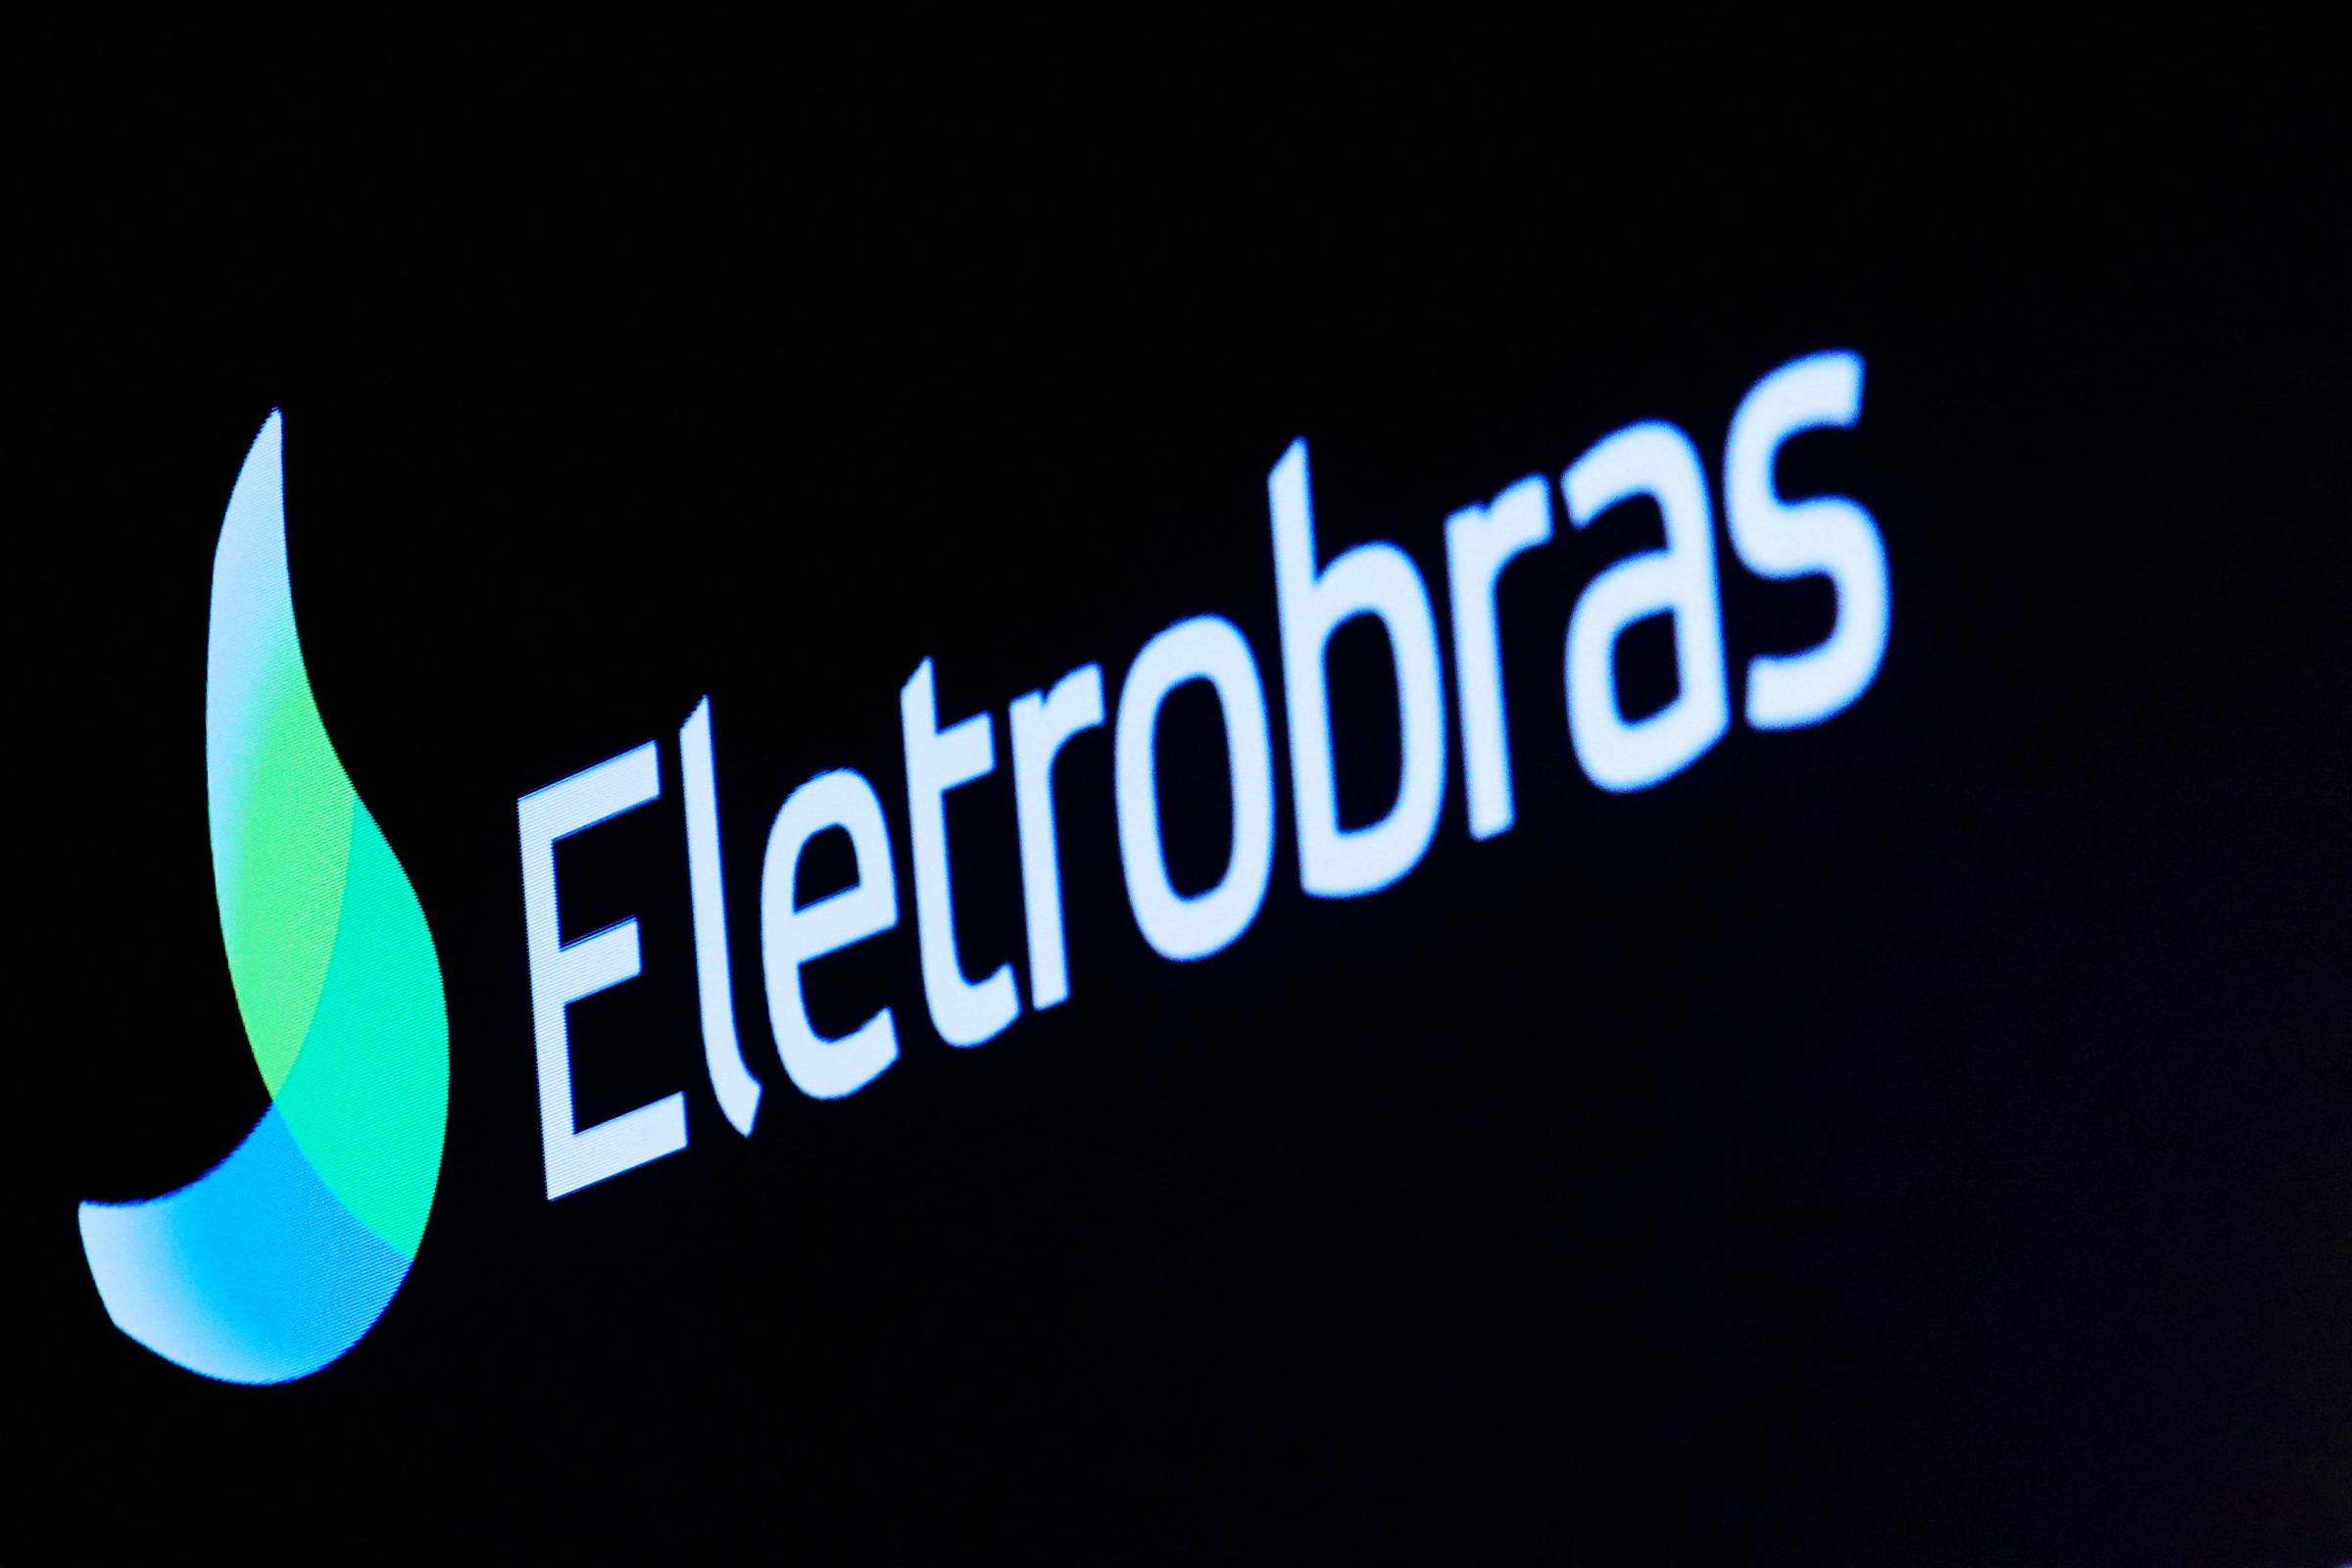 Eletrobras prepares a new layoff plan for up to 20% of employees – 03/14/2023 – Market